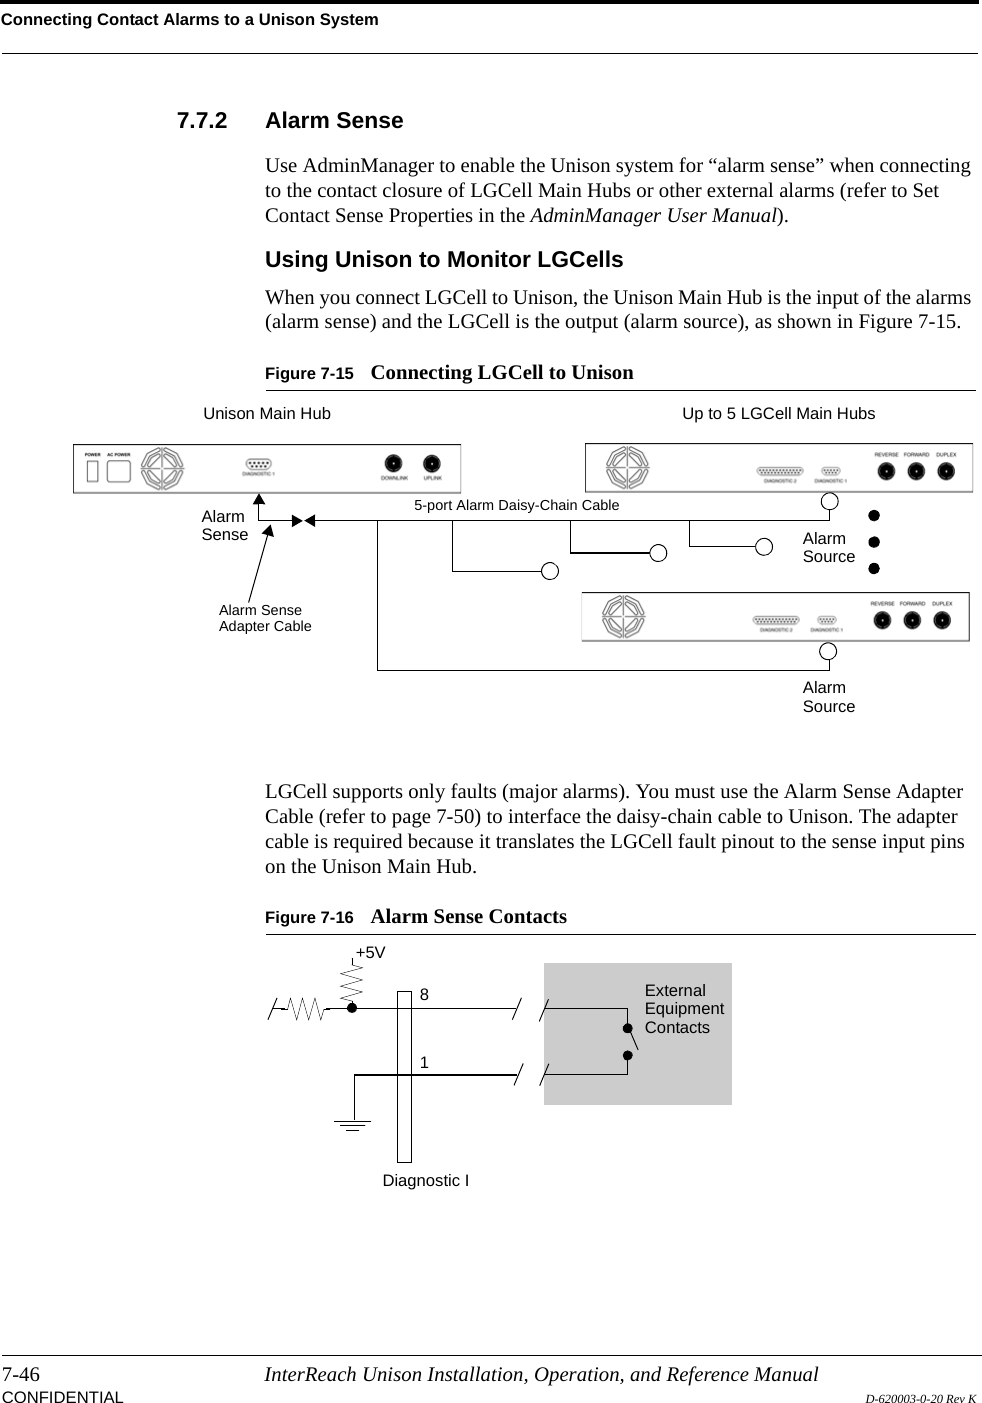 Connecting Contact Alarms to a Unison System7-46 InterReach Unison Installation, Operation, and Reference ManualCONFIDENTIAL D-620003-0-20 Rev K7.7.2 Alarm SenseUse AdminManager to enable the Unison system for “alarm sense” when connecting to the contact closure of LGCell Main Hubs or other external alarms (refer to Set Contact Sense Properties in the AdminManager User Manual).Using Unison to Monitor LGCellsWhen you connect LGCell to Unison, the Unison Main Hub is the input of the alarms (alarm sense) and the LGCell is the output (alarm source), as shown in Figure 7-15.Figure 7-15 Connecting LGCell to UnisonLGCell supports only faults (major alarms). You must use the Alarm Sense Adapter Cable (refer to page 7-50) to interface the daisy-chain cable to Unison. The adapter cable is required because it translates the LGCell fault pinout to the sense input pins on the Unison Main Hub.Figure 7-16 Alarm Sense ContactsUp to 5 LGCell Main HubsUnison Main HubAlarmSense AlarmSourceAlarmSourceAlarm SenseAdapter Cable5-port Alarm Daisy-Chain Cable81Diagnostic IExternalEquipmentContacts+5V